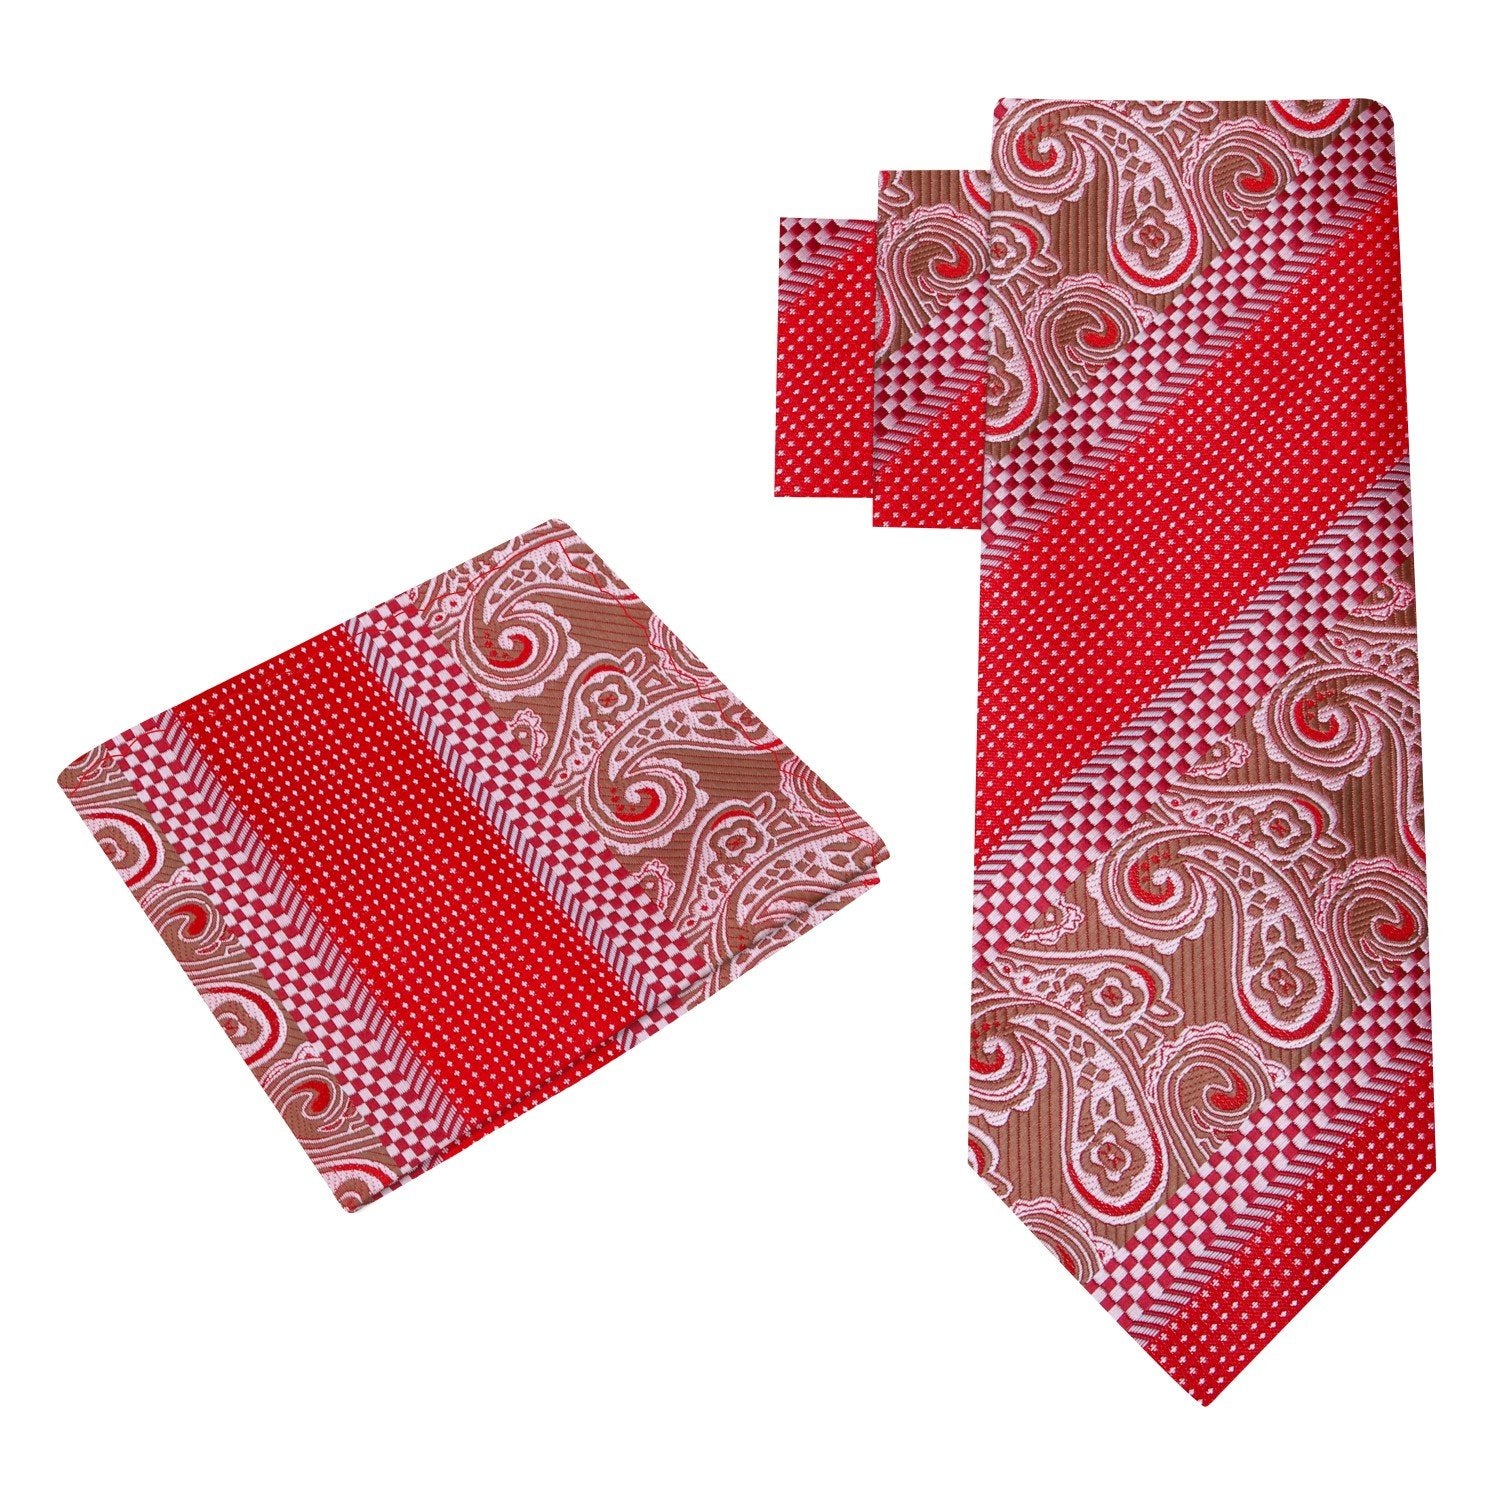 Alt View: Bright Red, Brown Paisley Check Tie and Square